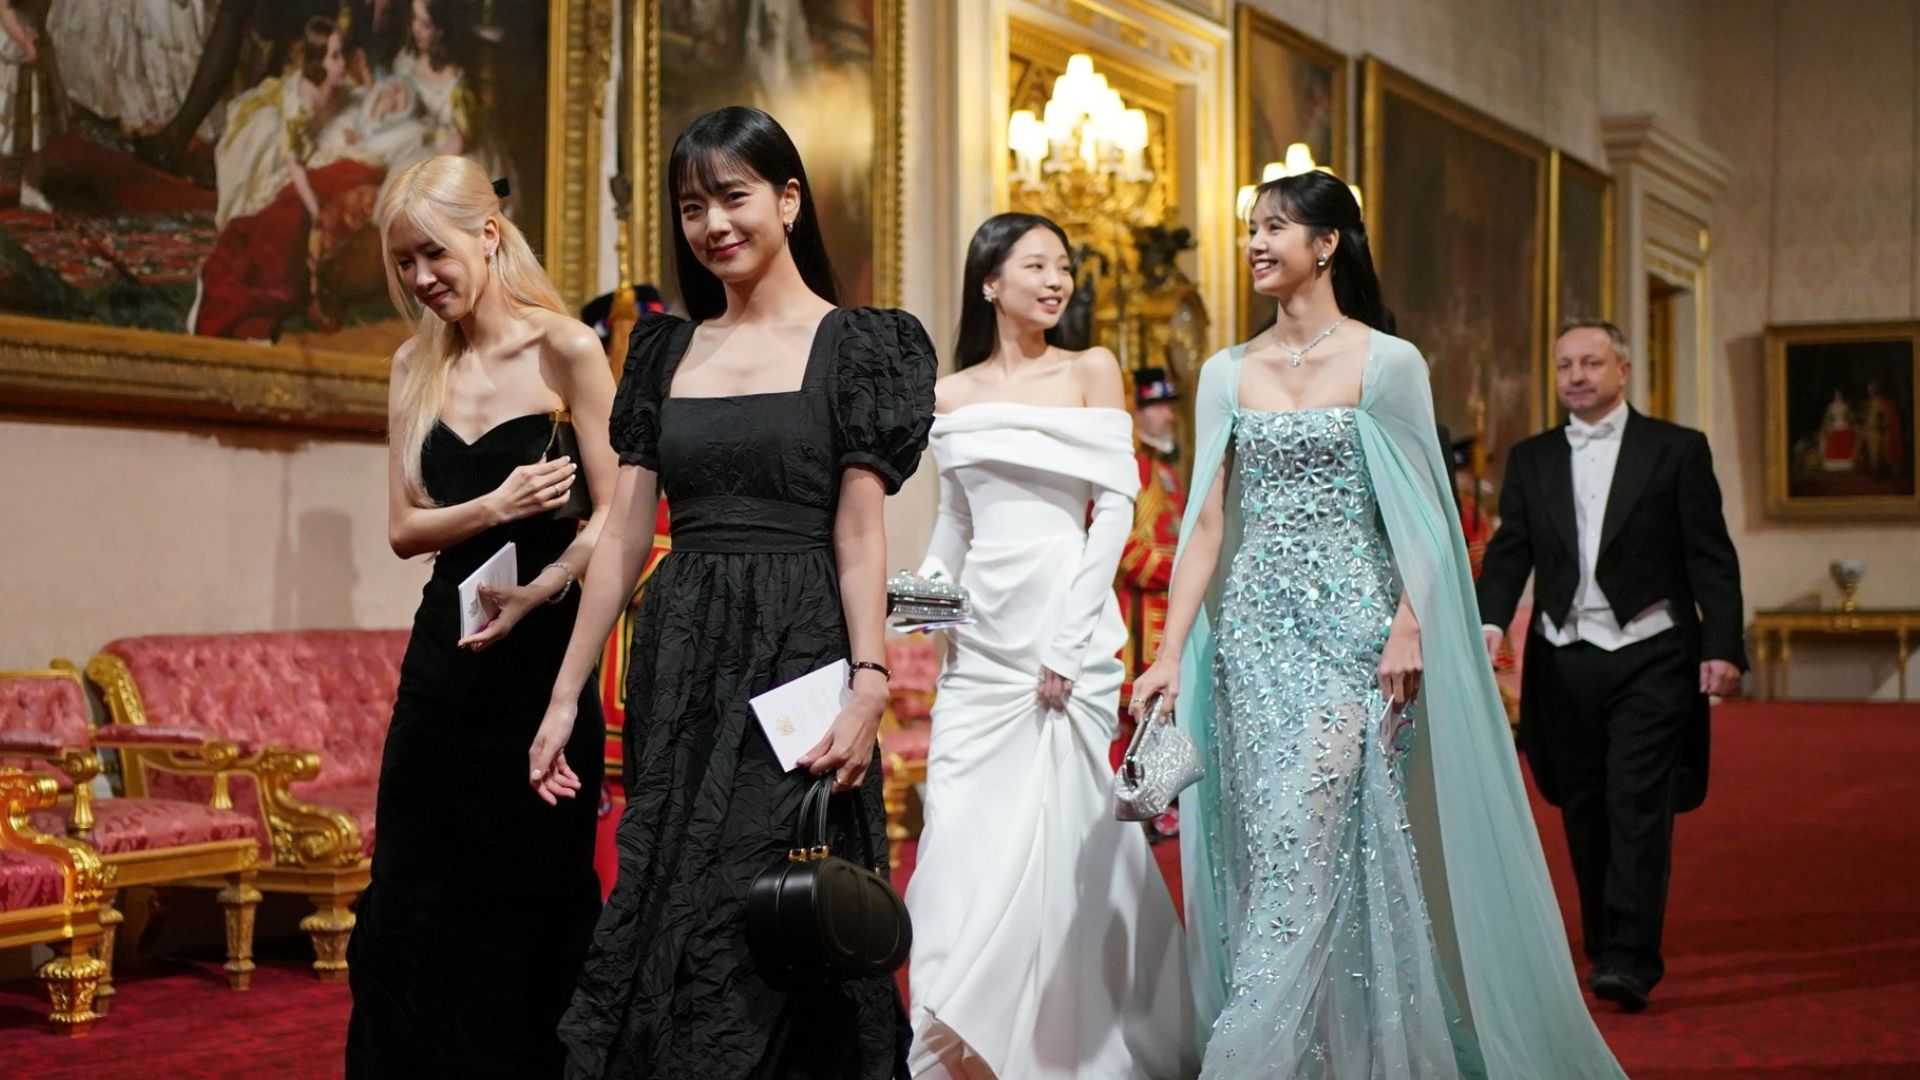 LOOK: BLACKPINK attends banquet in Buckingham Palace during South Korea state visit